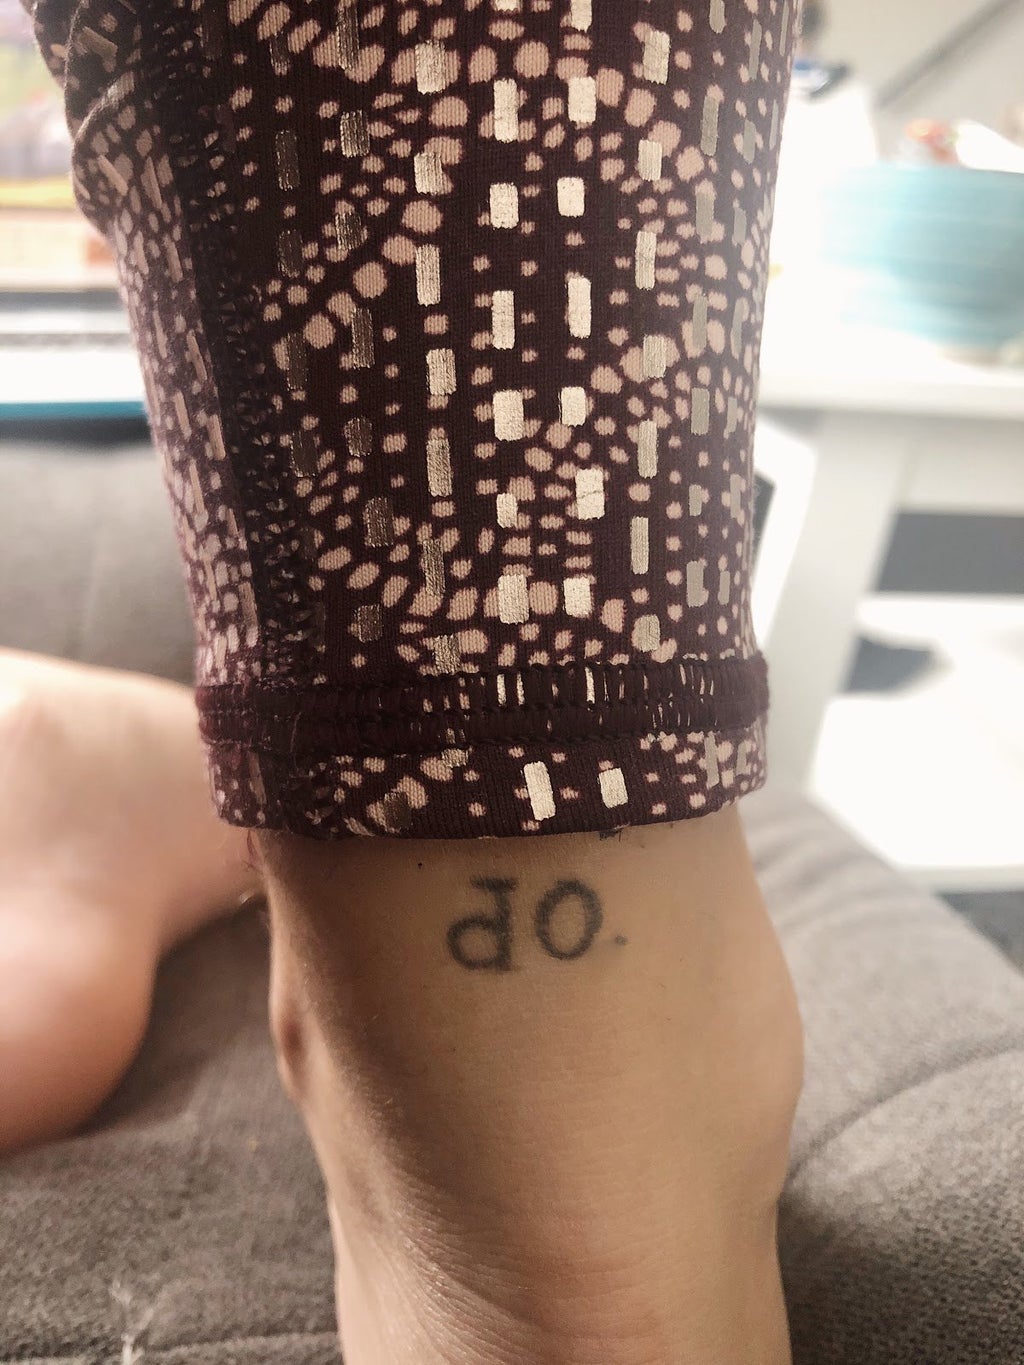 \"Do\" tattoo on back of ankle